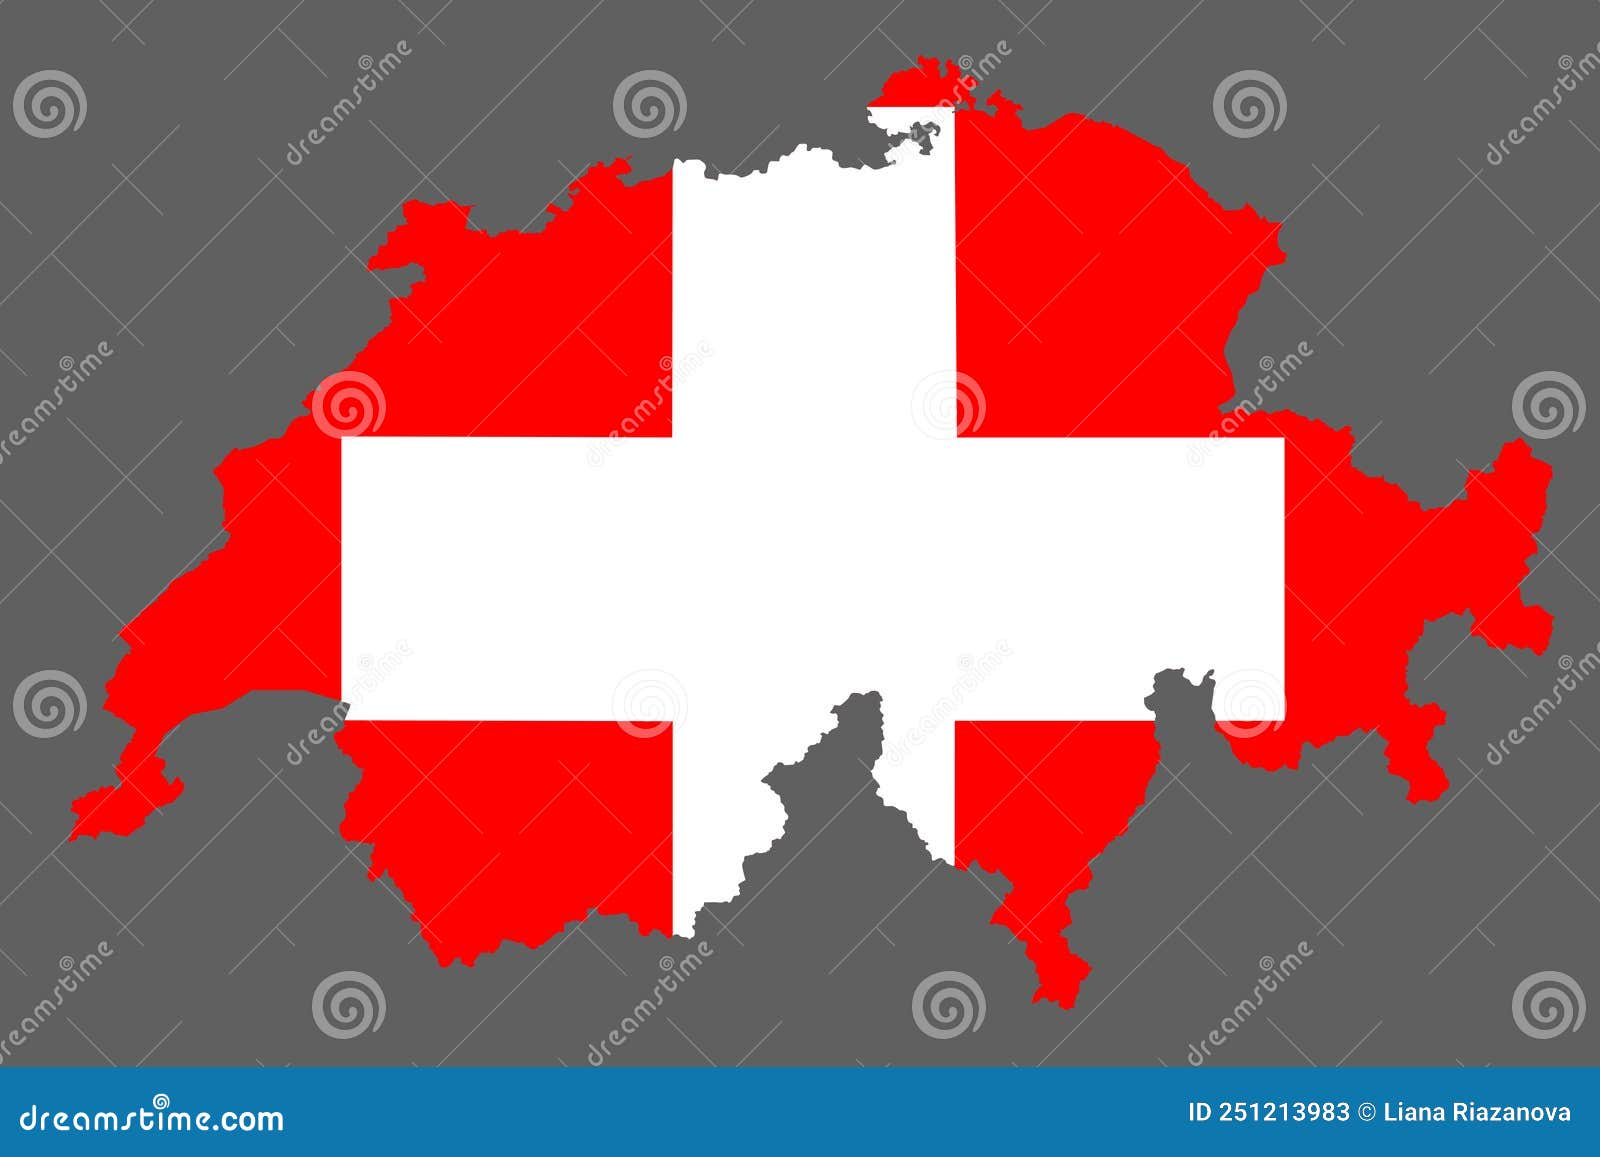 map switzerland with flag europ cartography